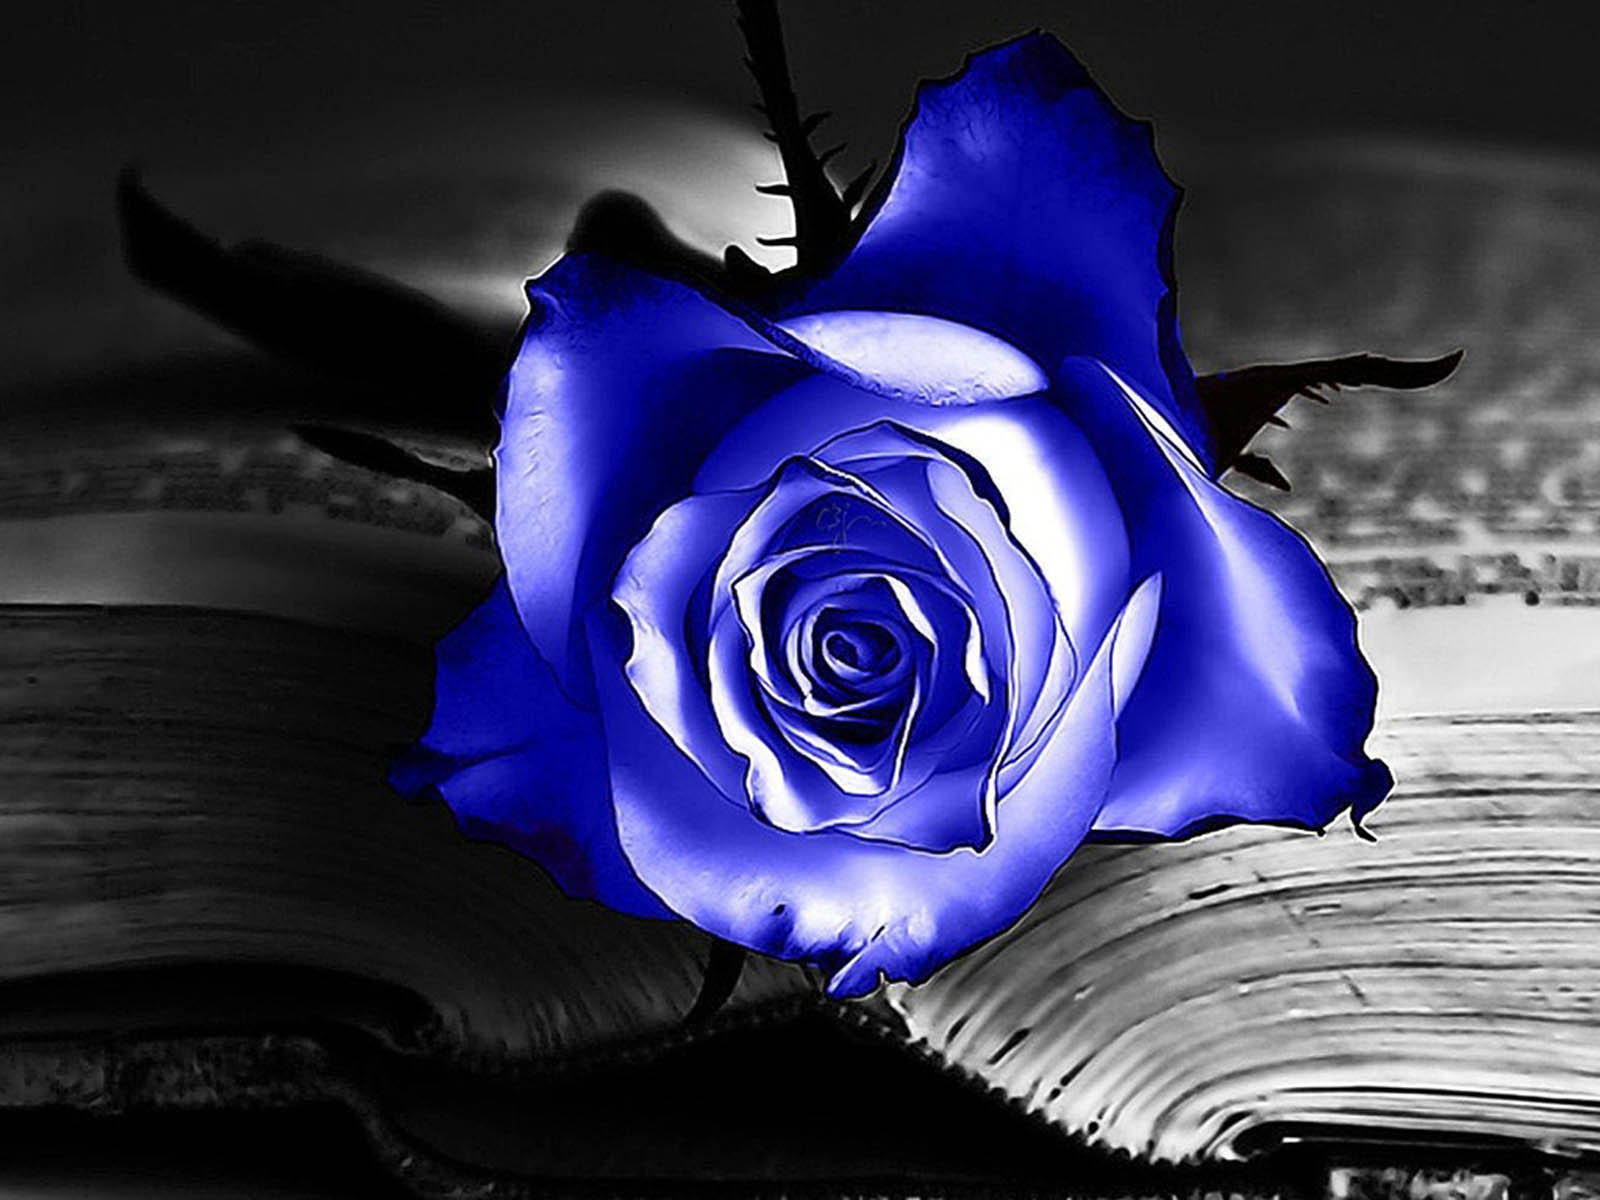 Download Free download blue rose wallpapers blue rose desktop wallpapers blue rose desktop [1600x1200 ...